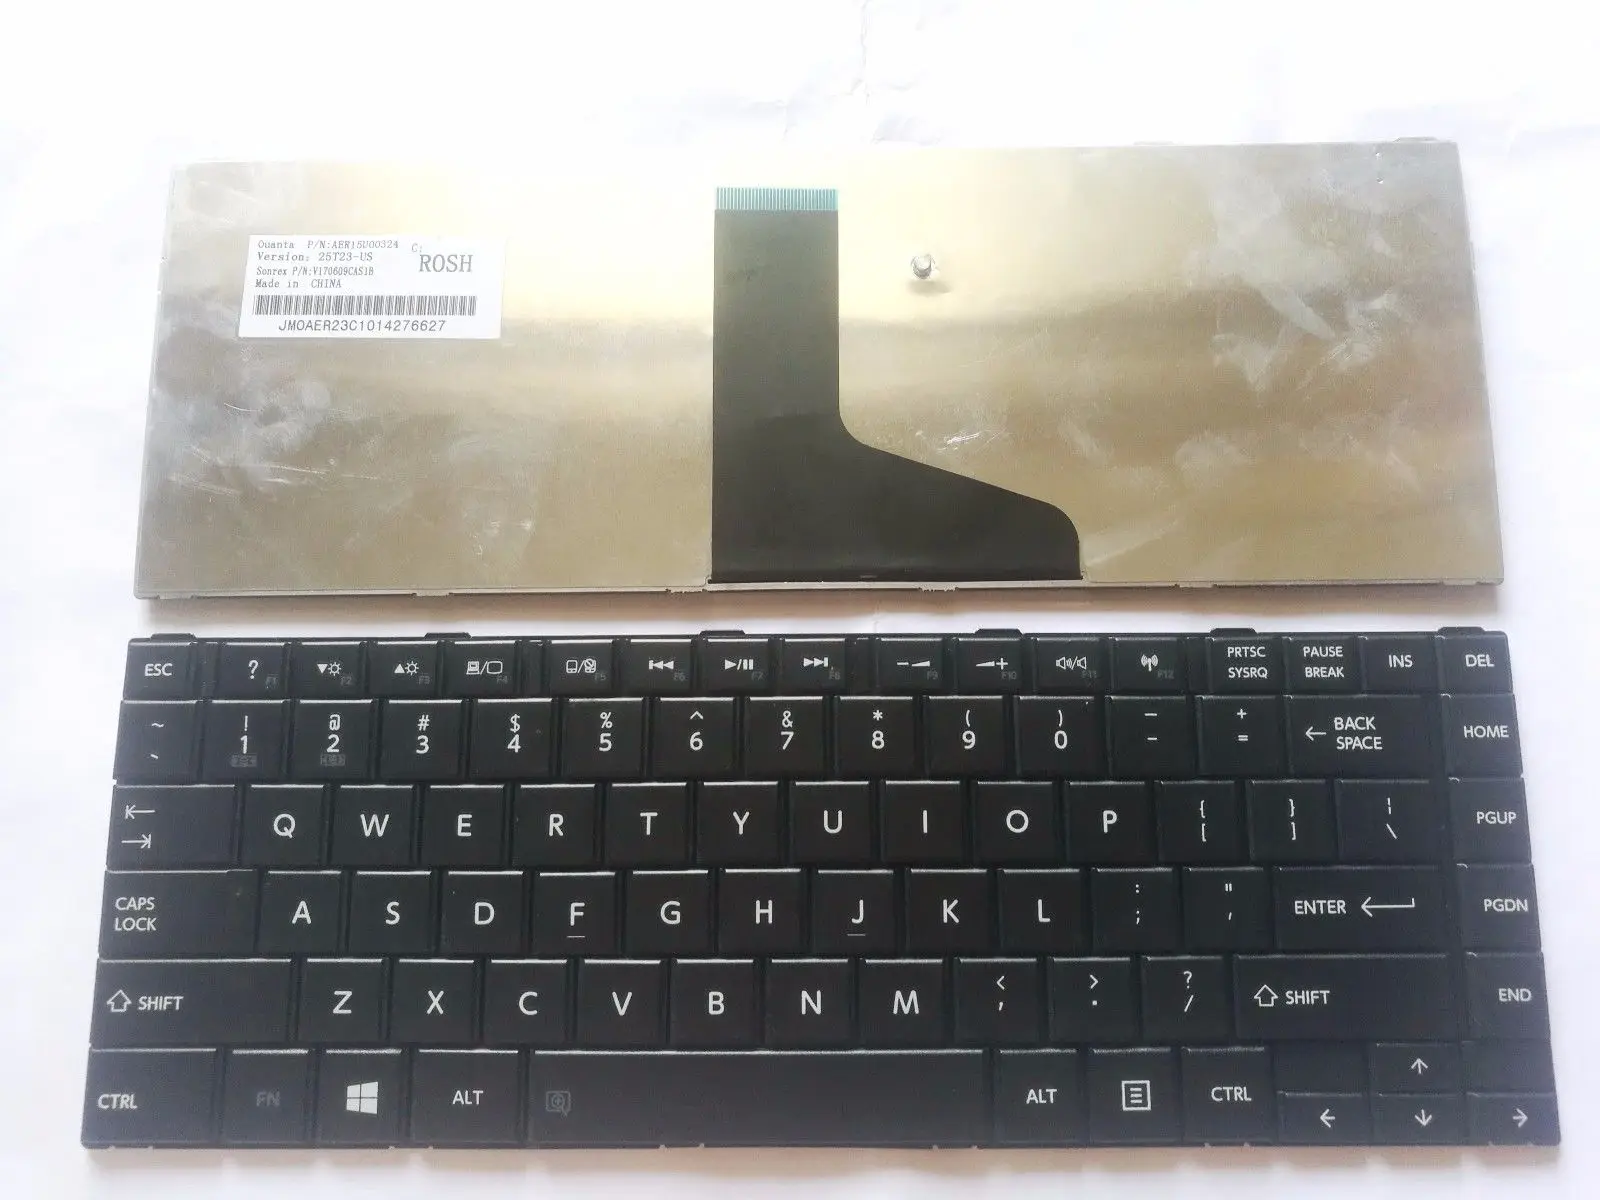 Replacement Keyboard With Frame For Toshiba Satellite C845-S4230 C845-SP4201A C845-SP4201KA C845-SP4201SA C845-SP4201SL C845-SP4202SA C845-SP4207KL C845-SP4214SL C845-SP4221SL US Layout Black Color